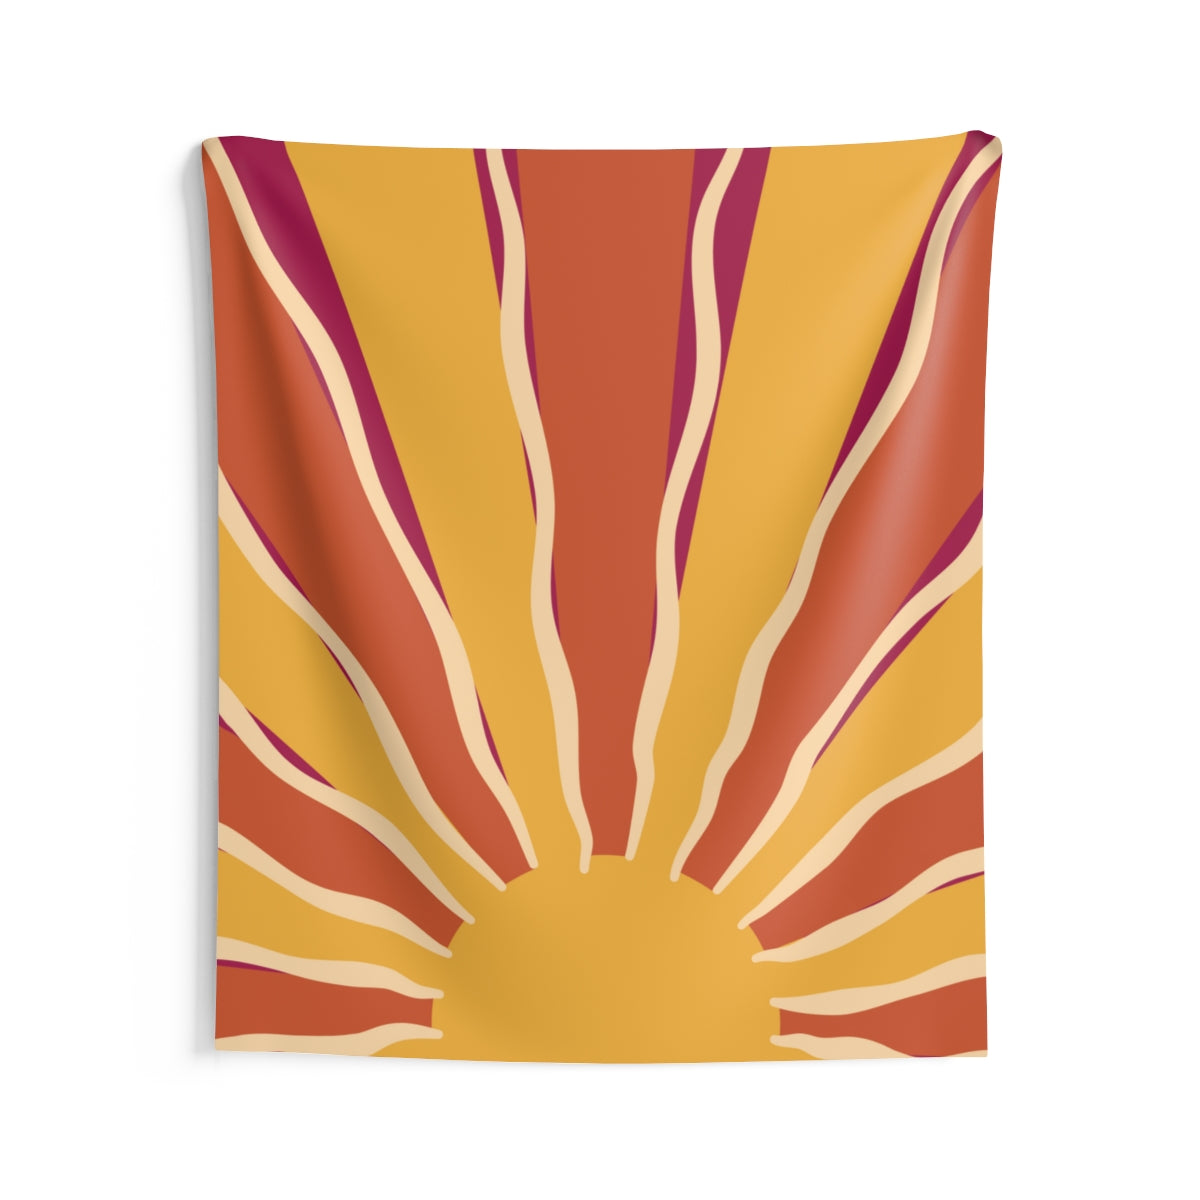 Groovy Sunburst Tapestry, Retro Sun 70s Vintage 1970s Landscape Wall Aesthetic Art Hanging Large Small Decor College Dorm Gift Starcove Fashion